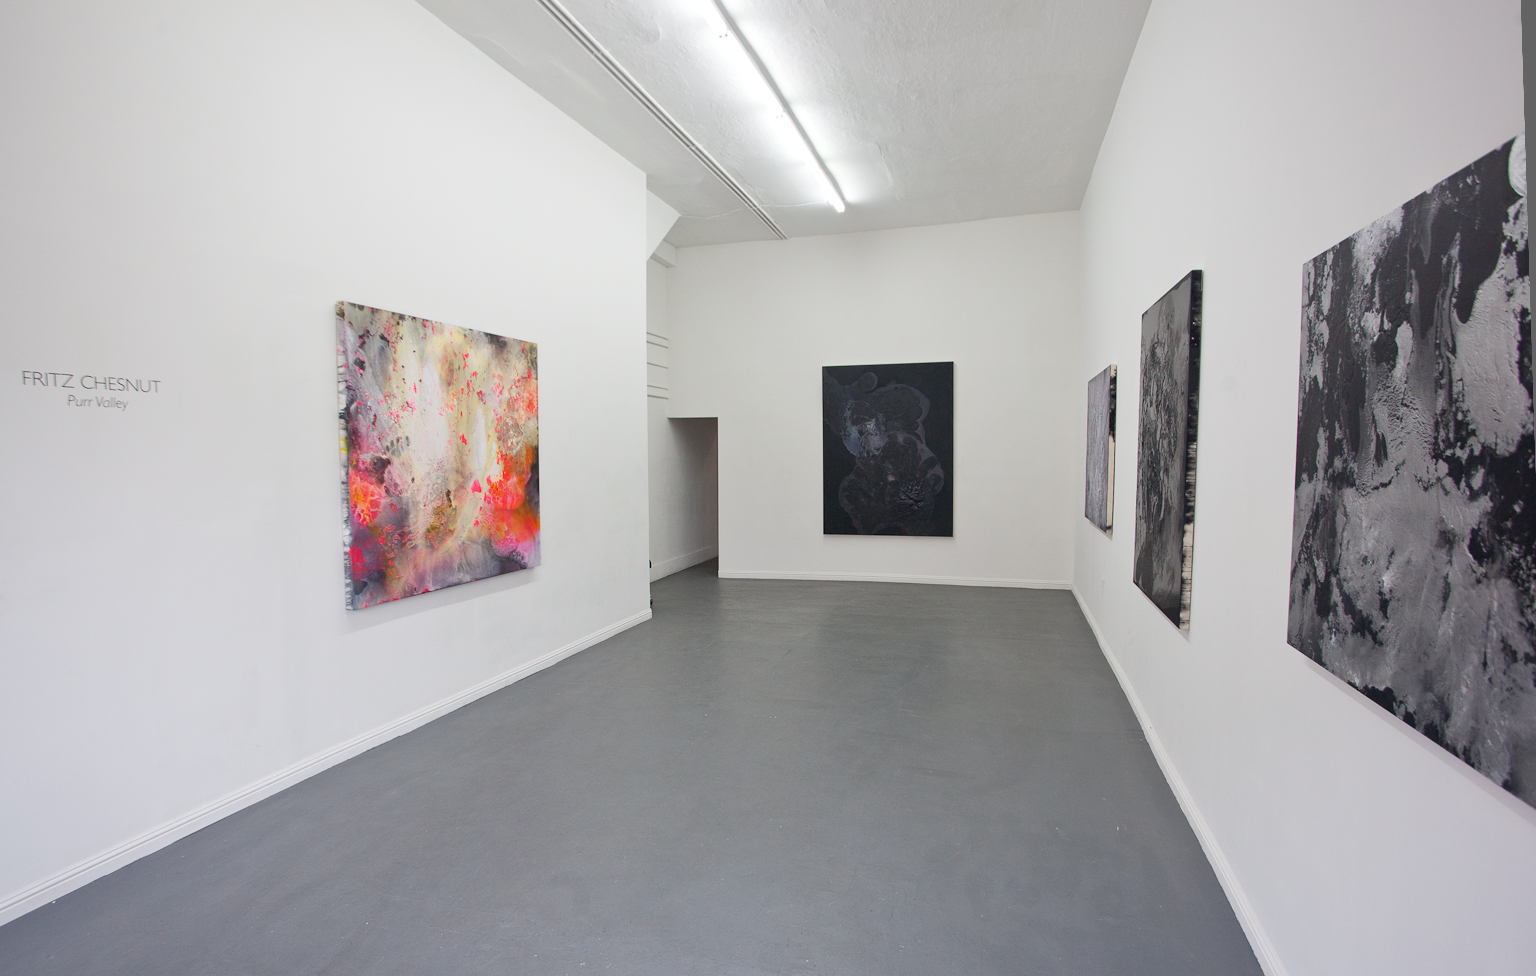   Purr Valley,  Installation view, CULT, Aimee Friberg Exhibitions, 2014 